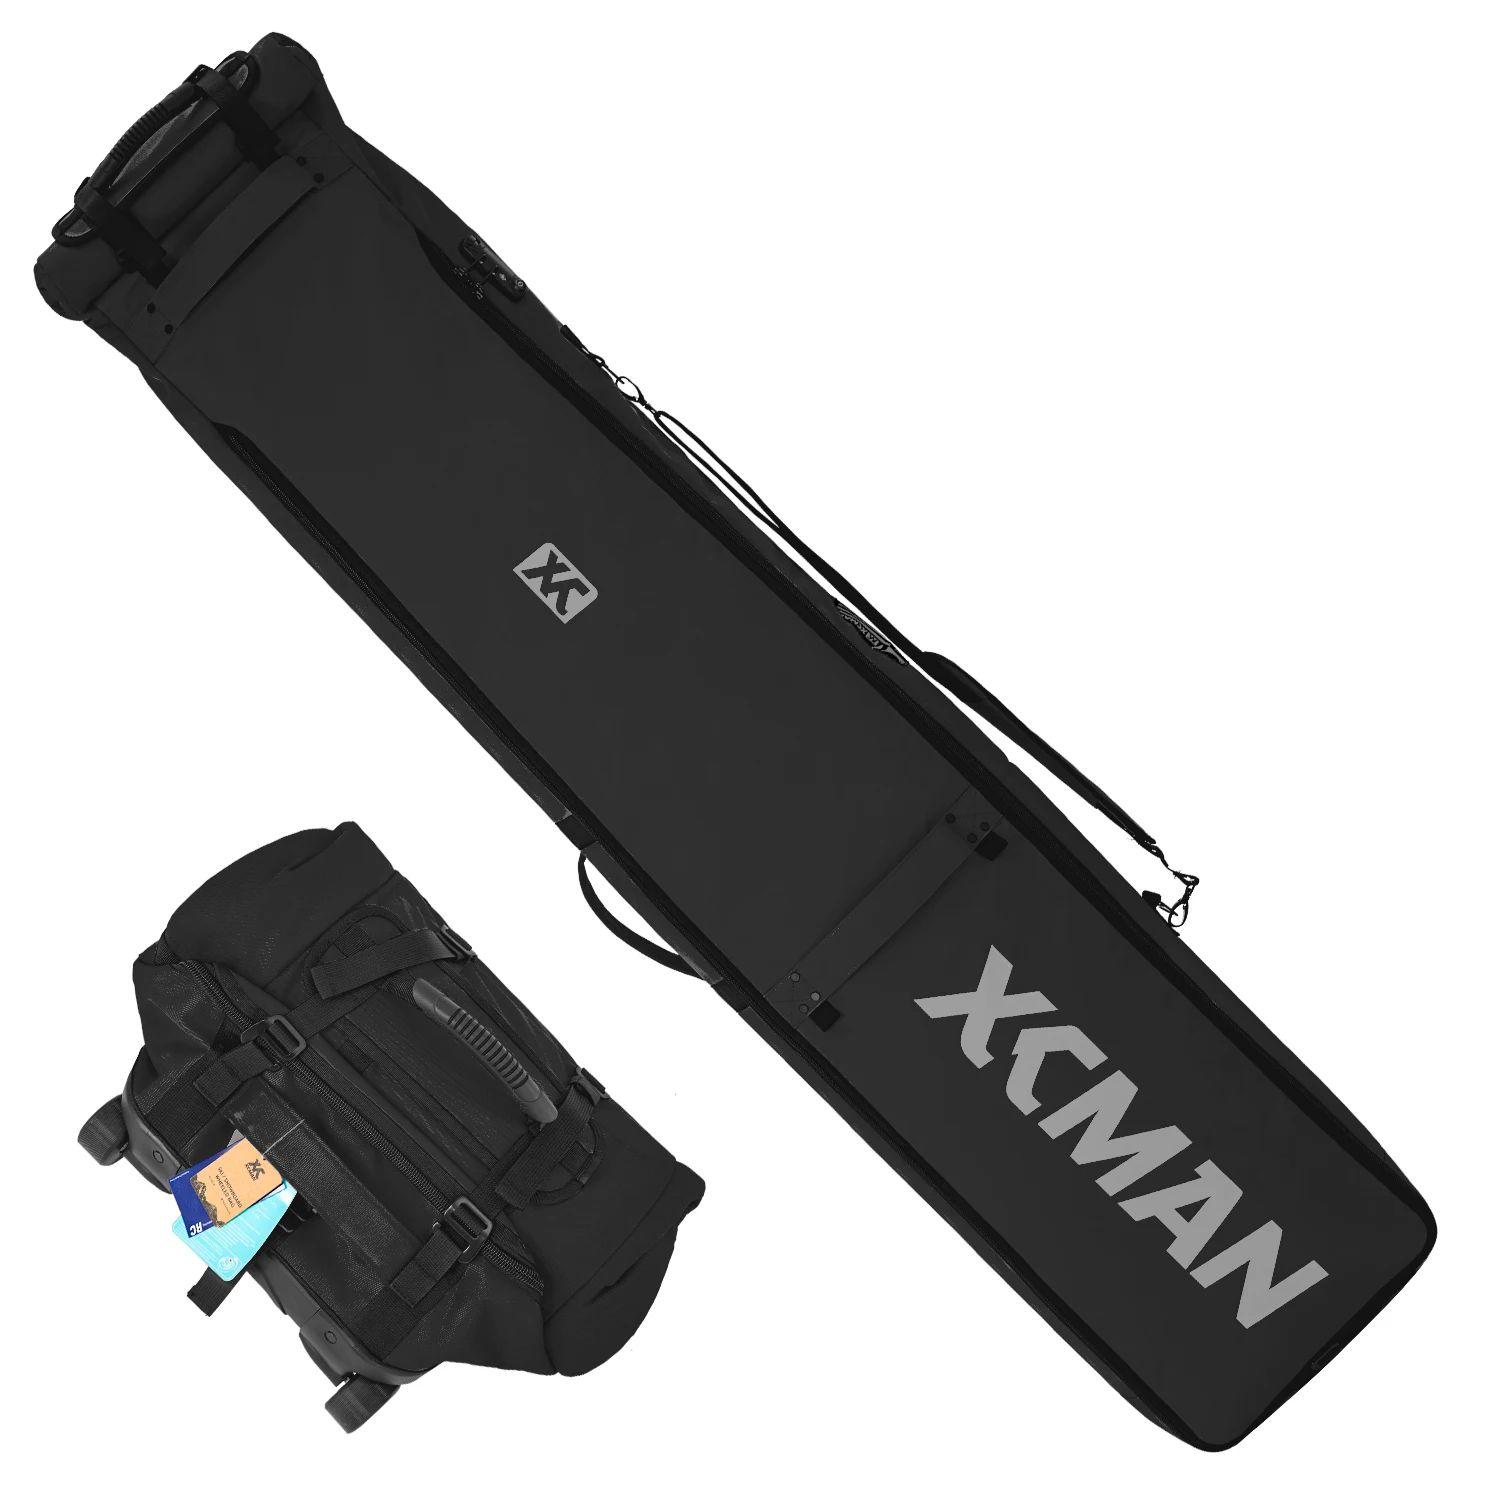 

XCMAN Padded Snowboard Bag with Wheels and Lock,Road Trips and Air Plane Travel Adjustable Length 63 to 78 inch